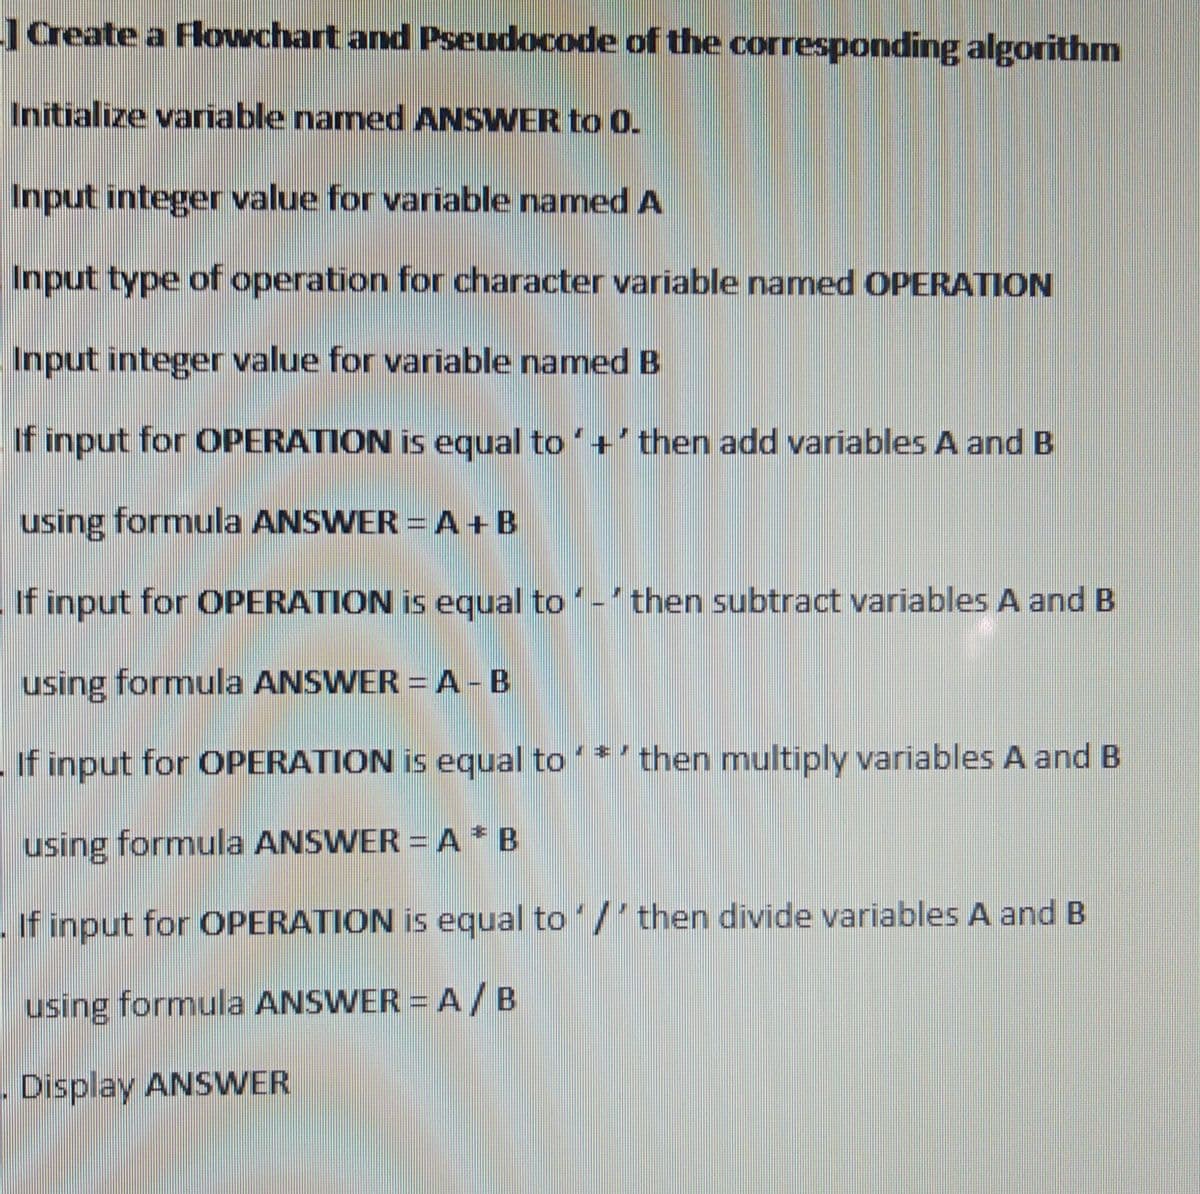 Create a Flowchart and Pseudocode of the corresponding algorithm
Initialize variable named ANSWER to 0.
Input integer value for variable named A
Input type of operation for character variable named OPERATION
Input integer value for variable named B
If input for OPERATION is equal to'+'then add variables A and B
using formula ANSWER = A+B
If input for OPERATION is equal to- then subtract variables A and B
using formula ANSWER = A-B
If input for OPERATION is equal to *'then multiply variables A and B
using formula ANSWER = A* B
- If input for OPERATION is equal to /' then divide variables A and B
using formula ANSWER = A /B
.Display ANSWER
